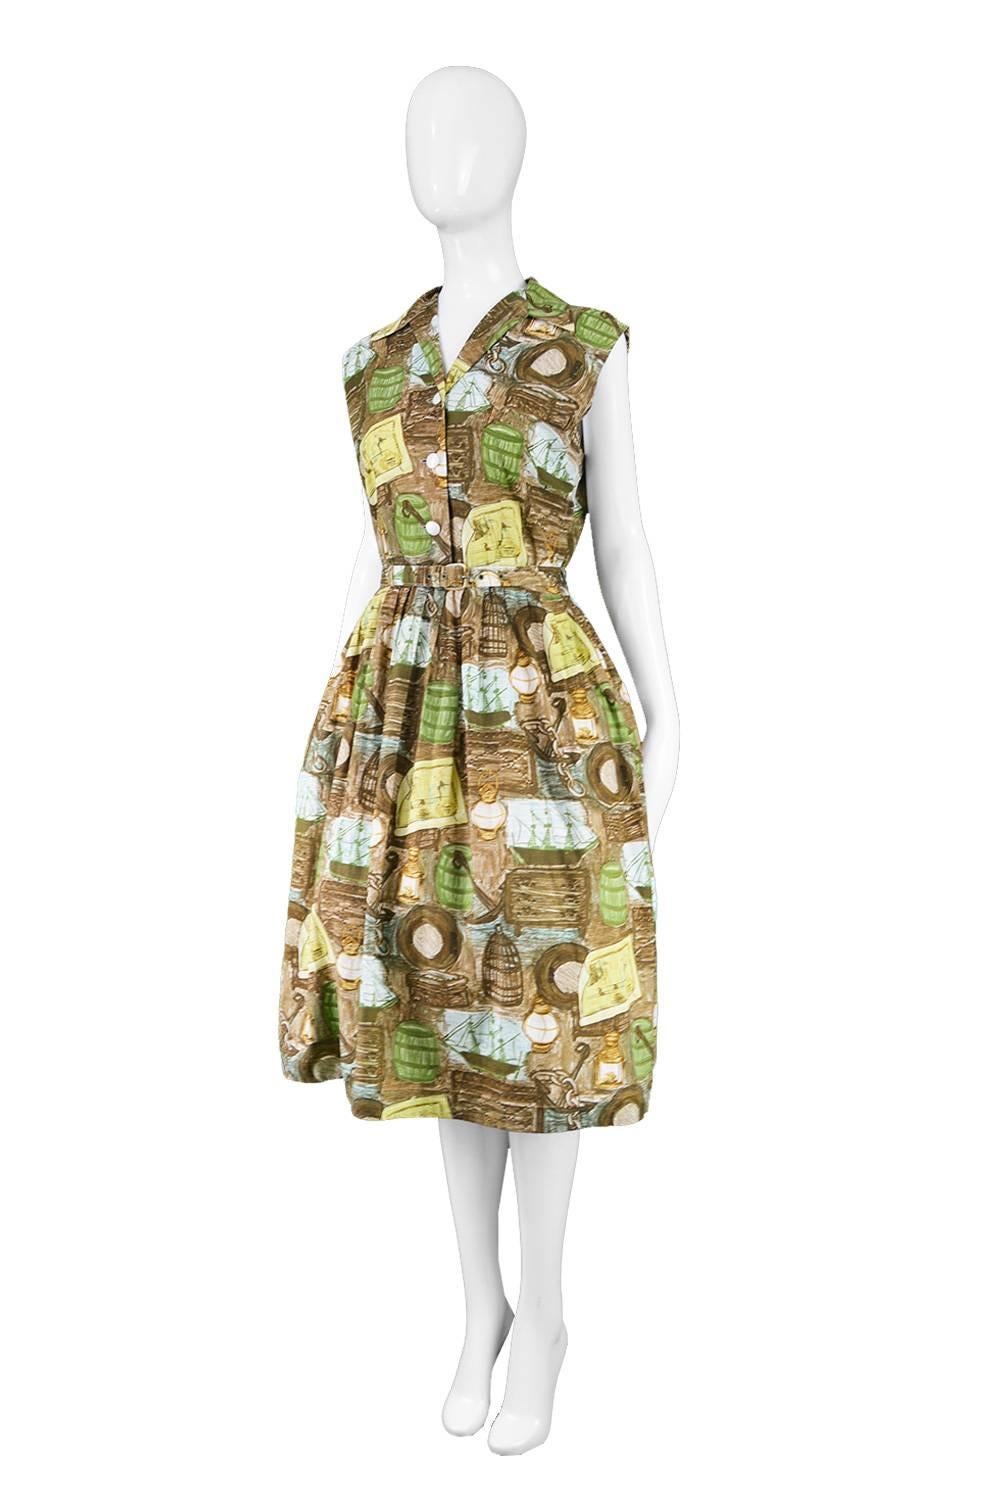 Vintage 1950s Novelty Print Nautical Theme Brown & Green Cotton Dress For Sale 3